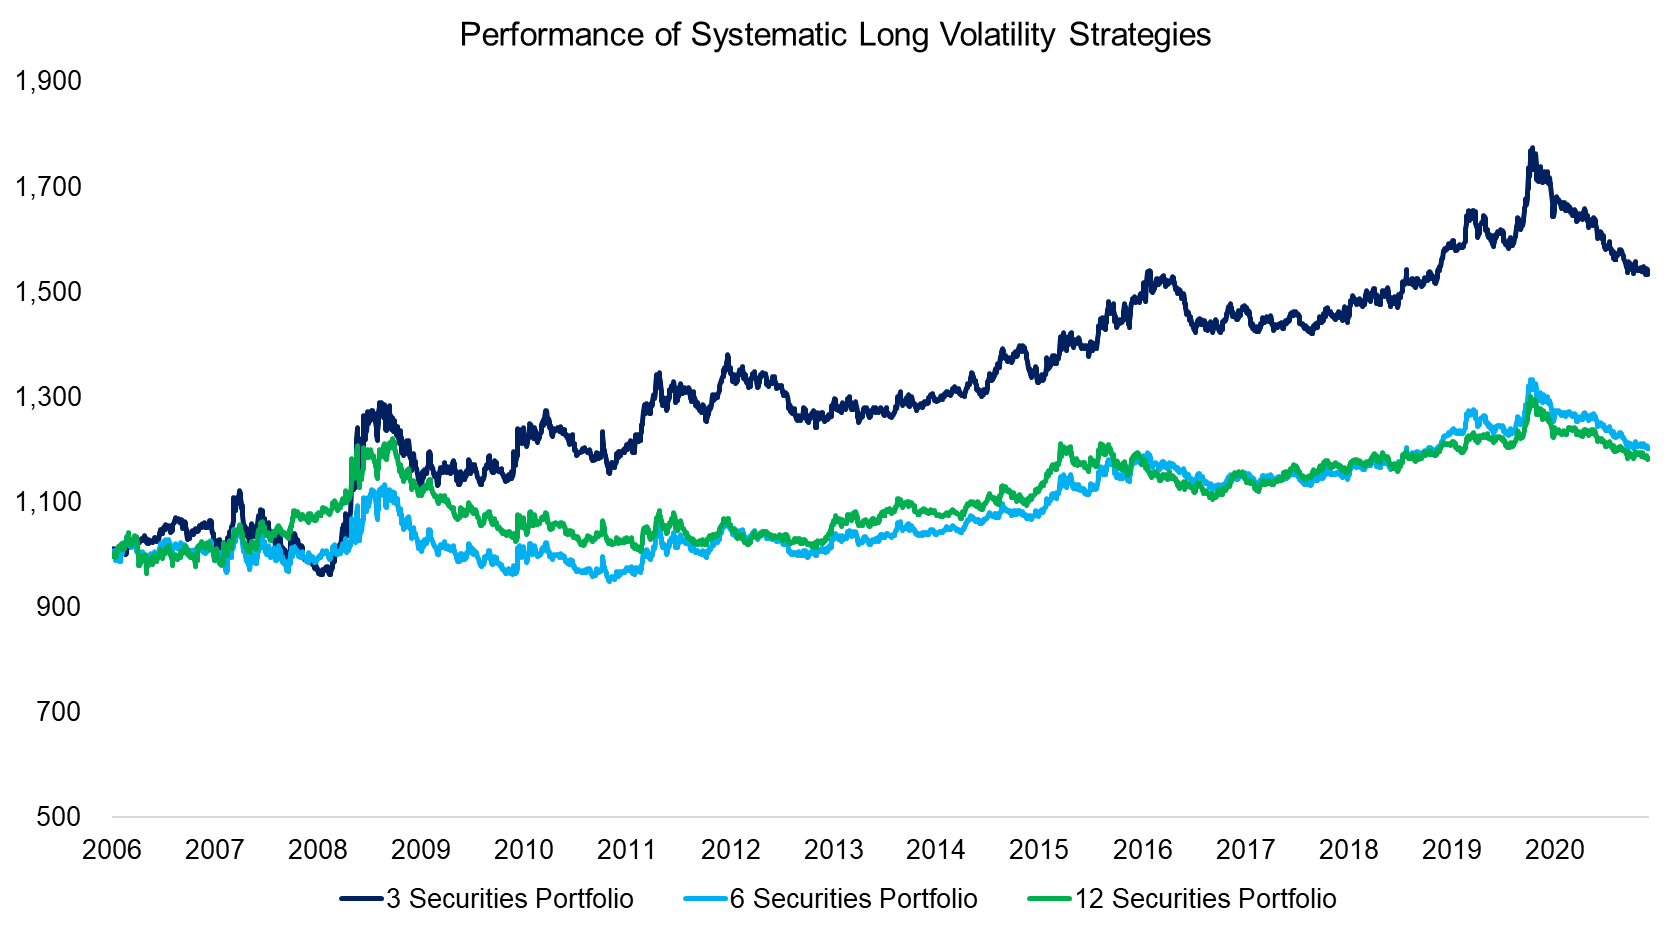 Performance of Systematic Long Volatility Strategies